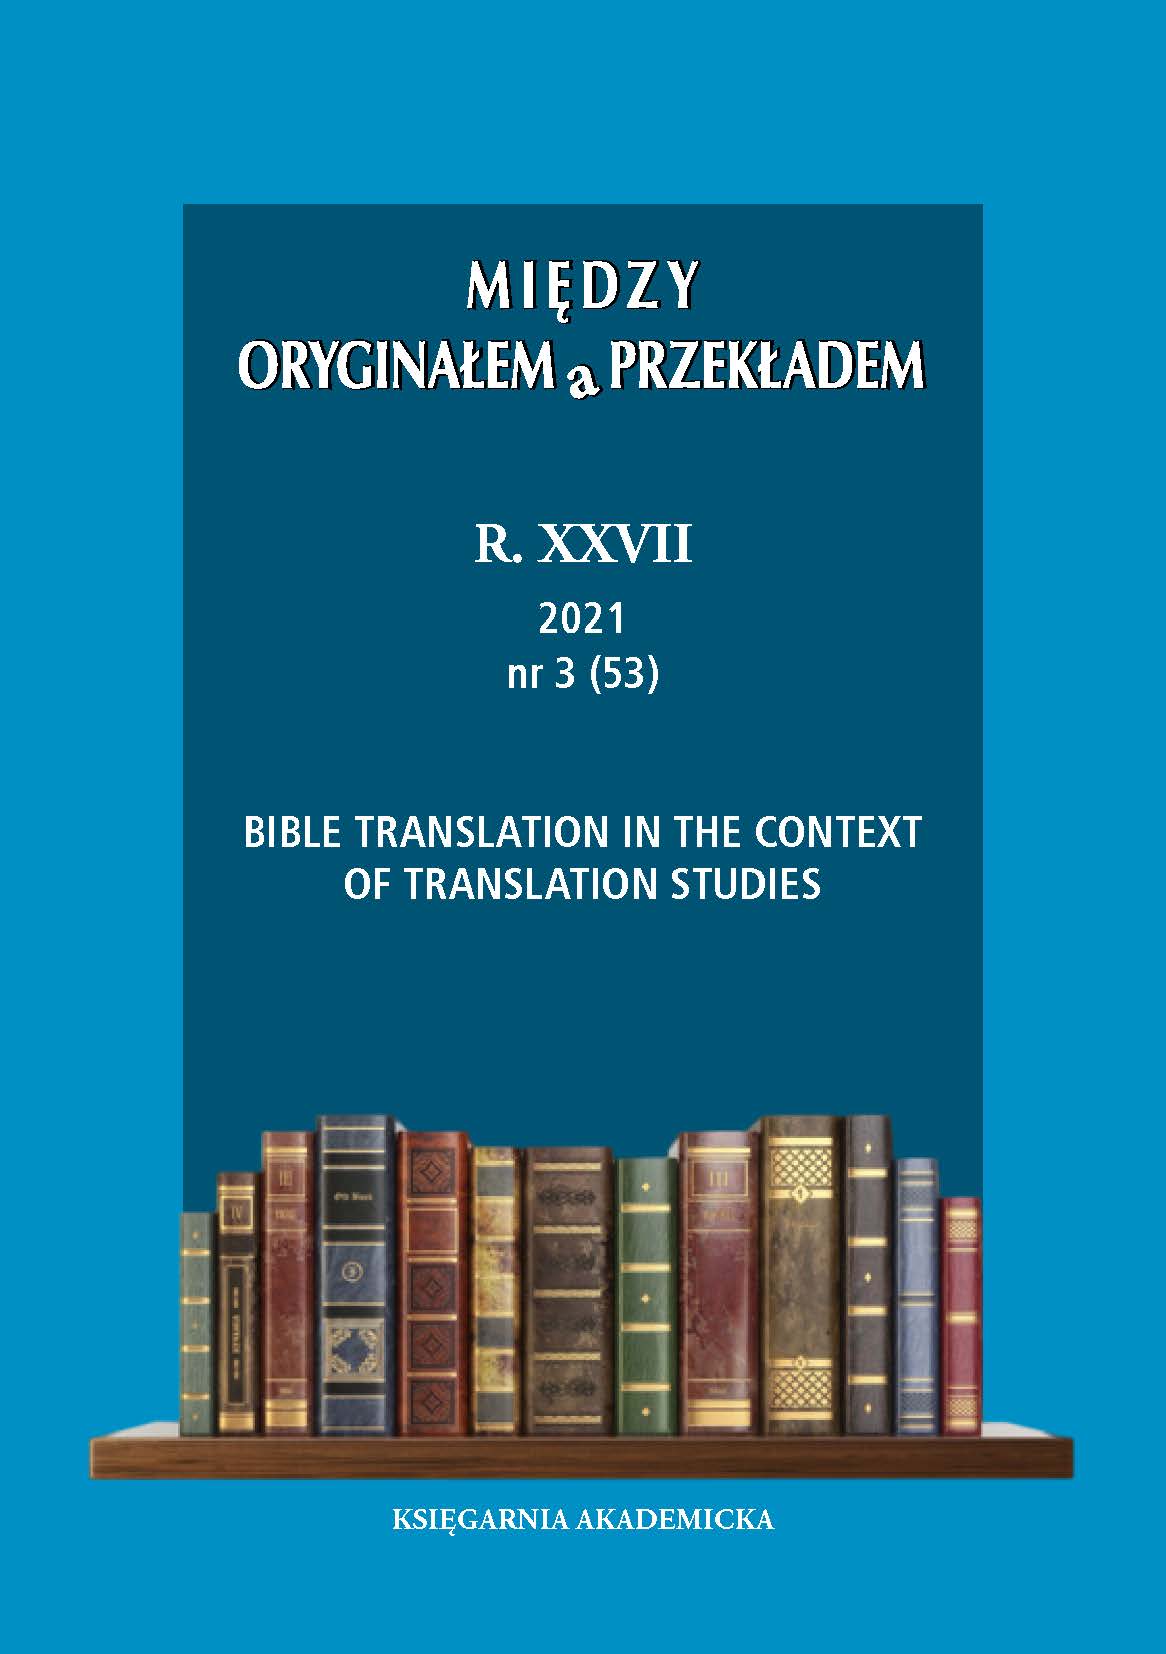 Bible Translation in the Context of Translation Studies